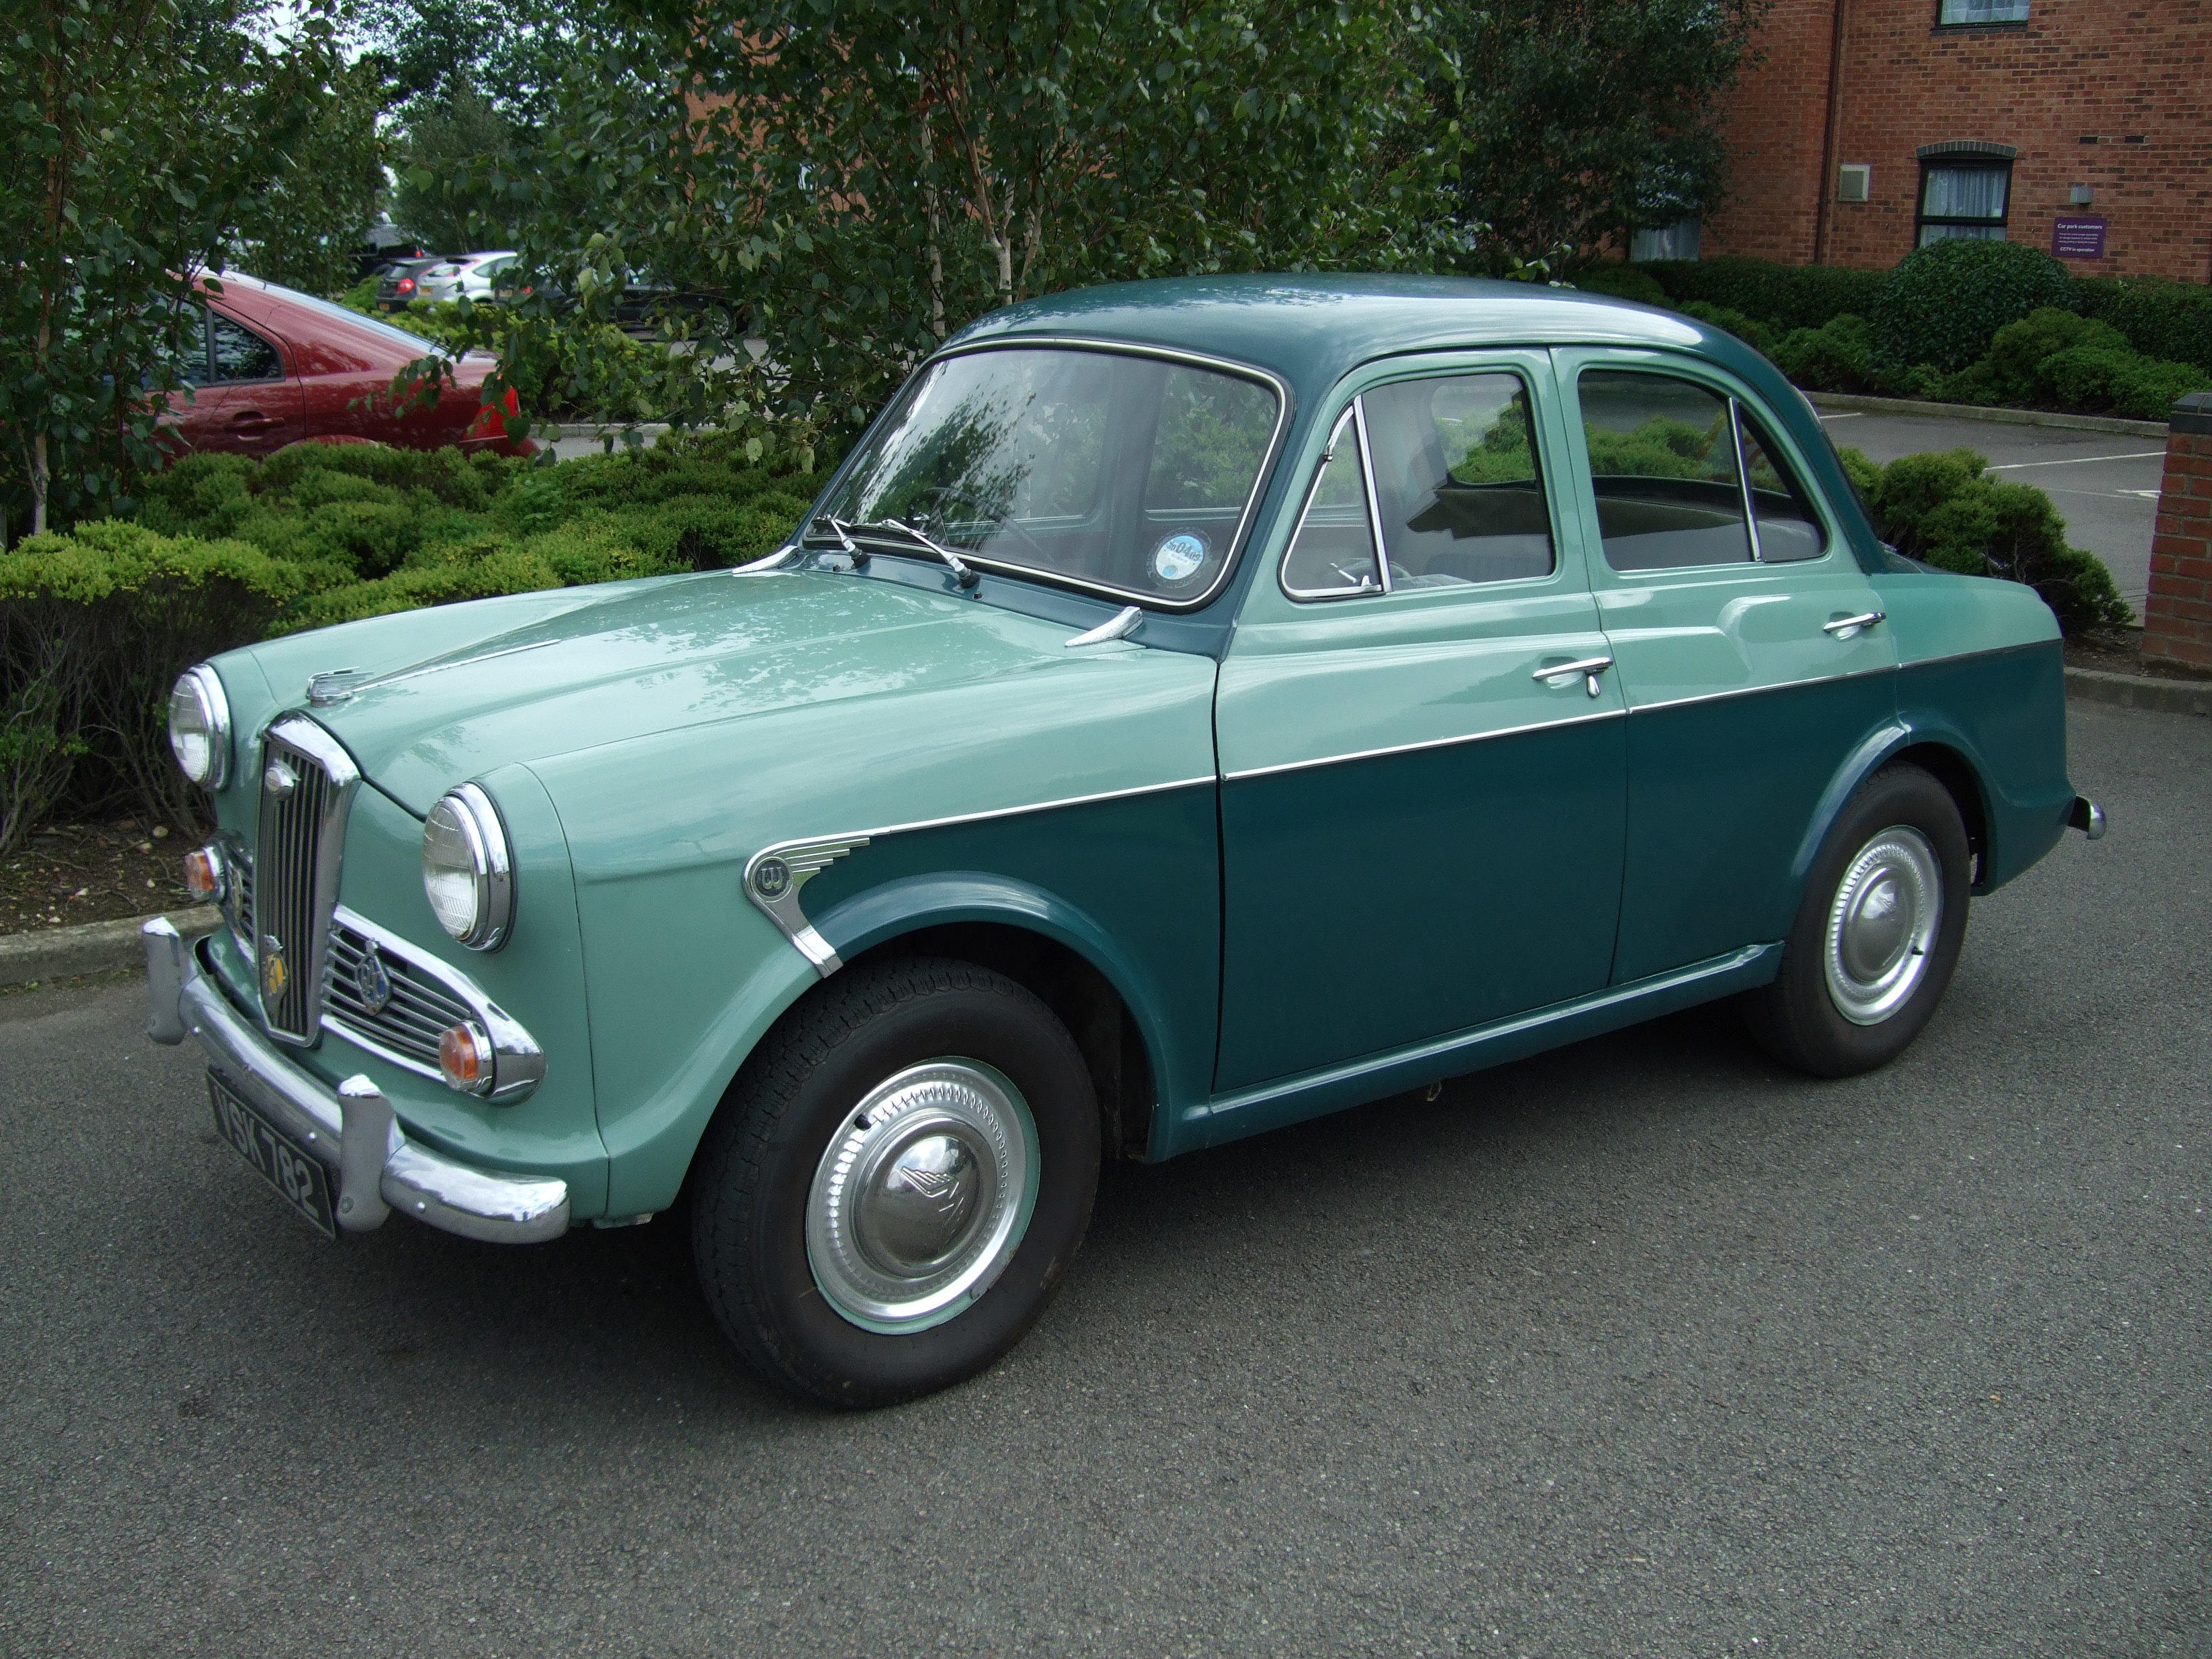 My Other Car is a Wolseley 1500 